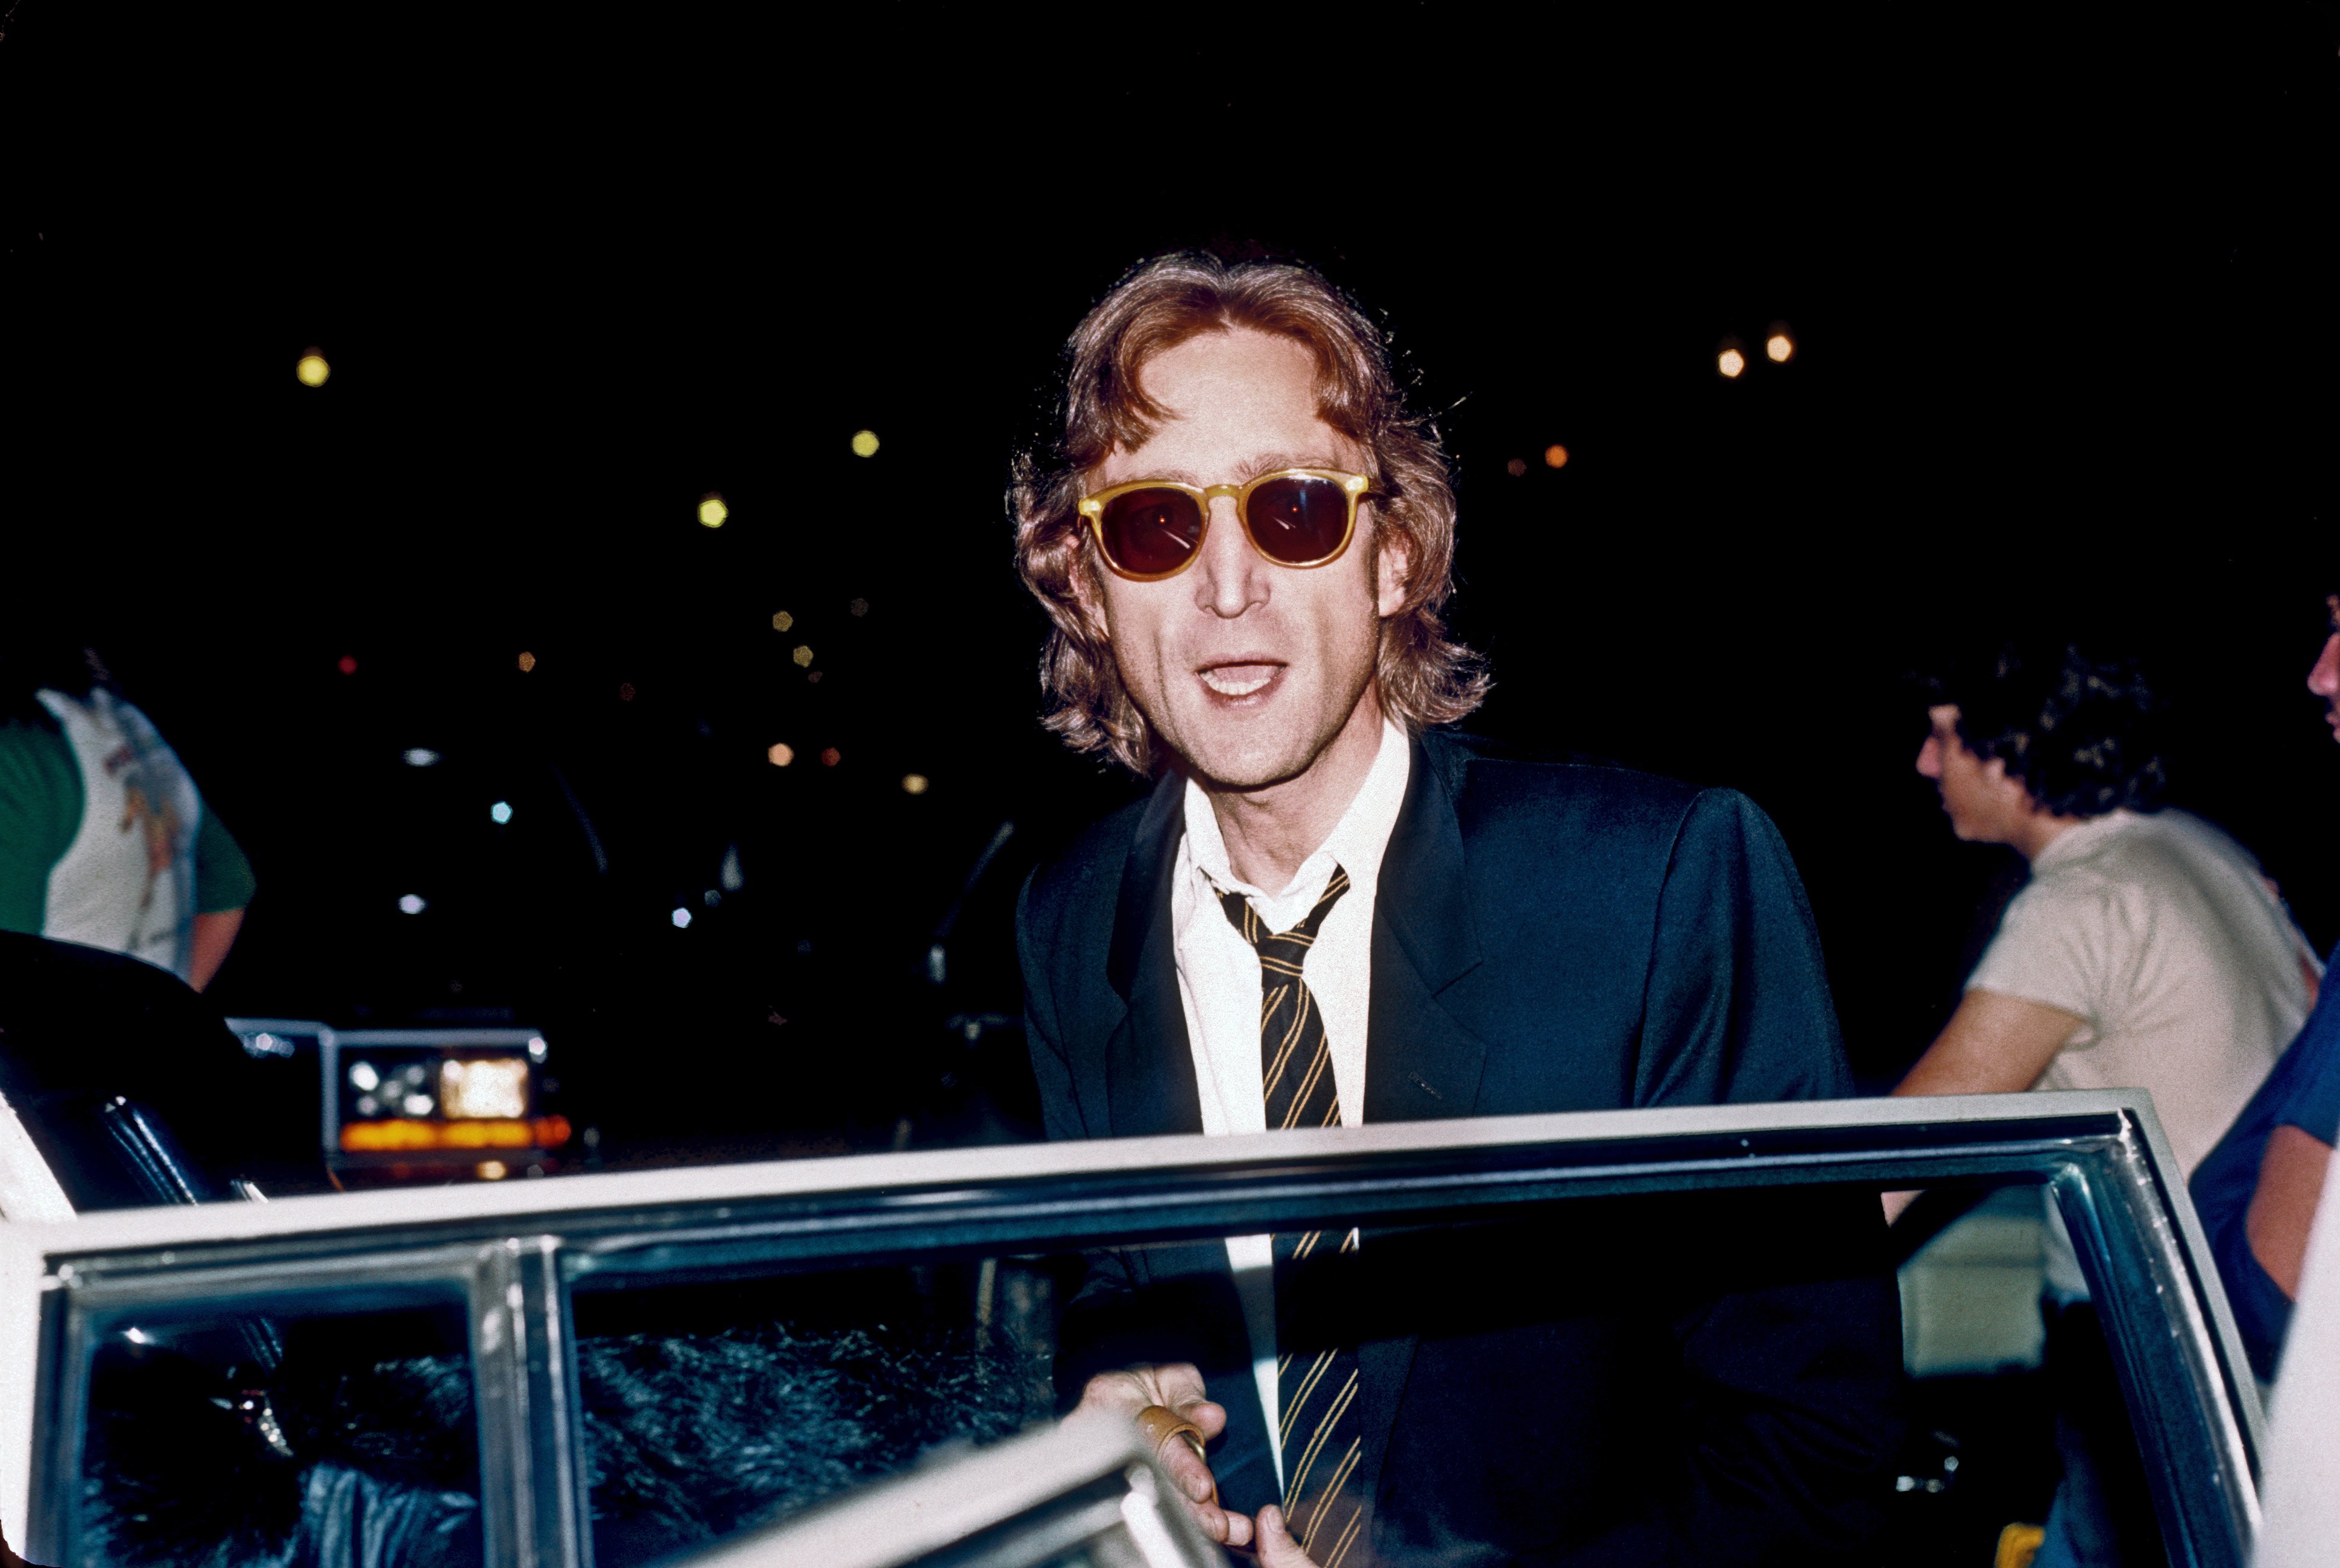 John Lennon, 4 months before his death in 1980